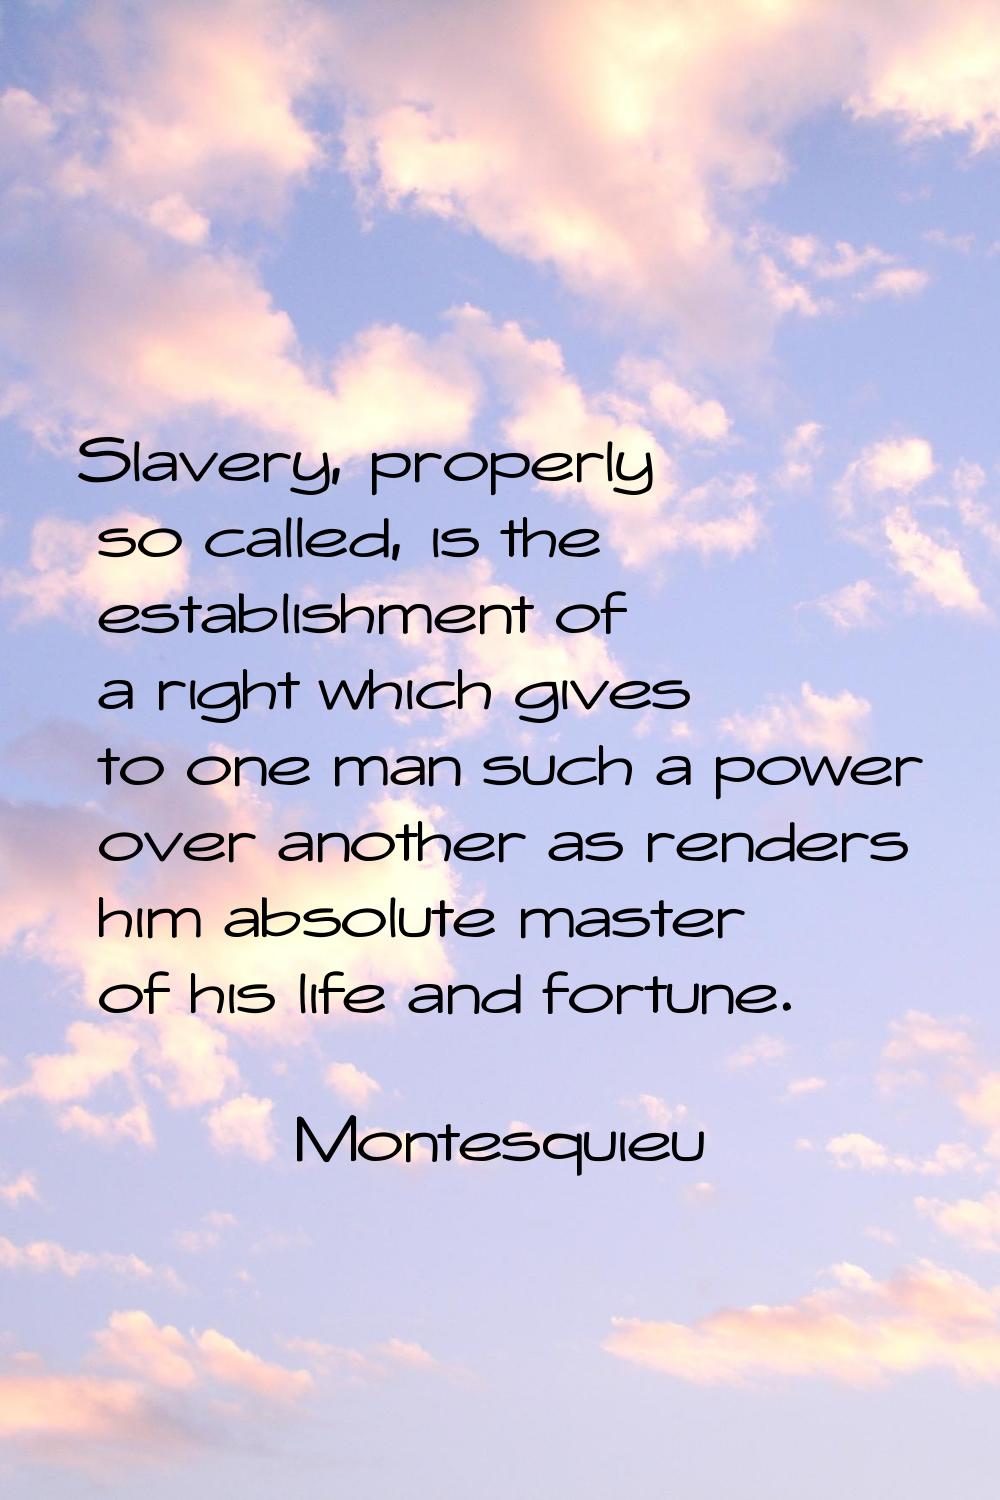 Slavery, properly so called, is the establishment of a right which gives to one man such a power ov